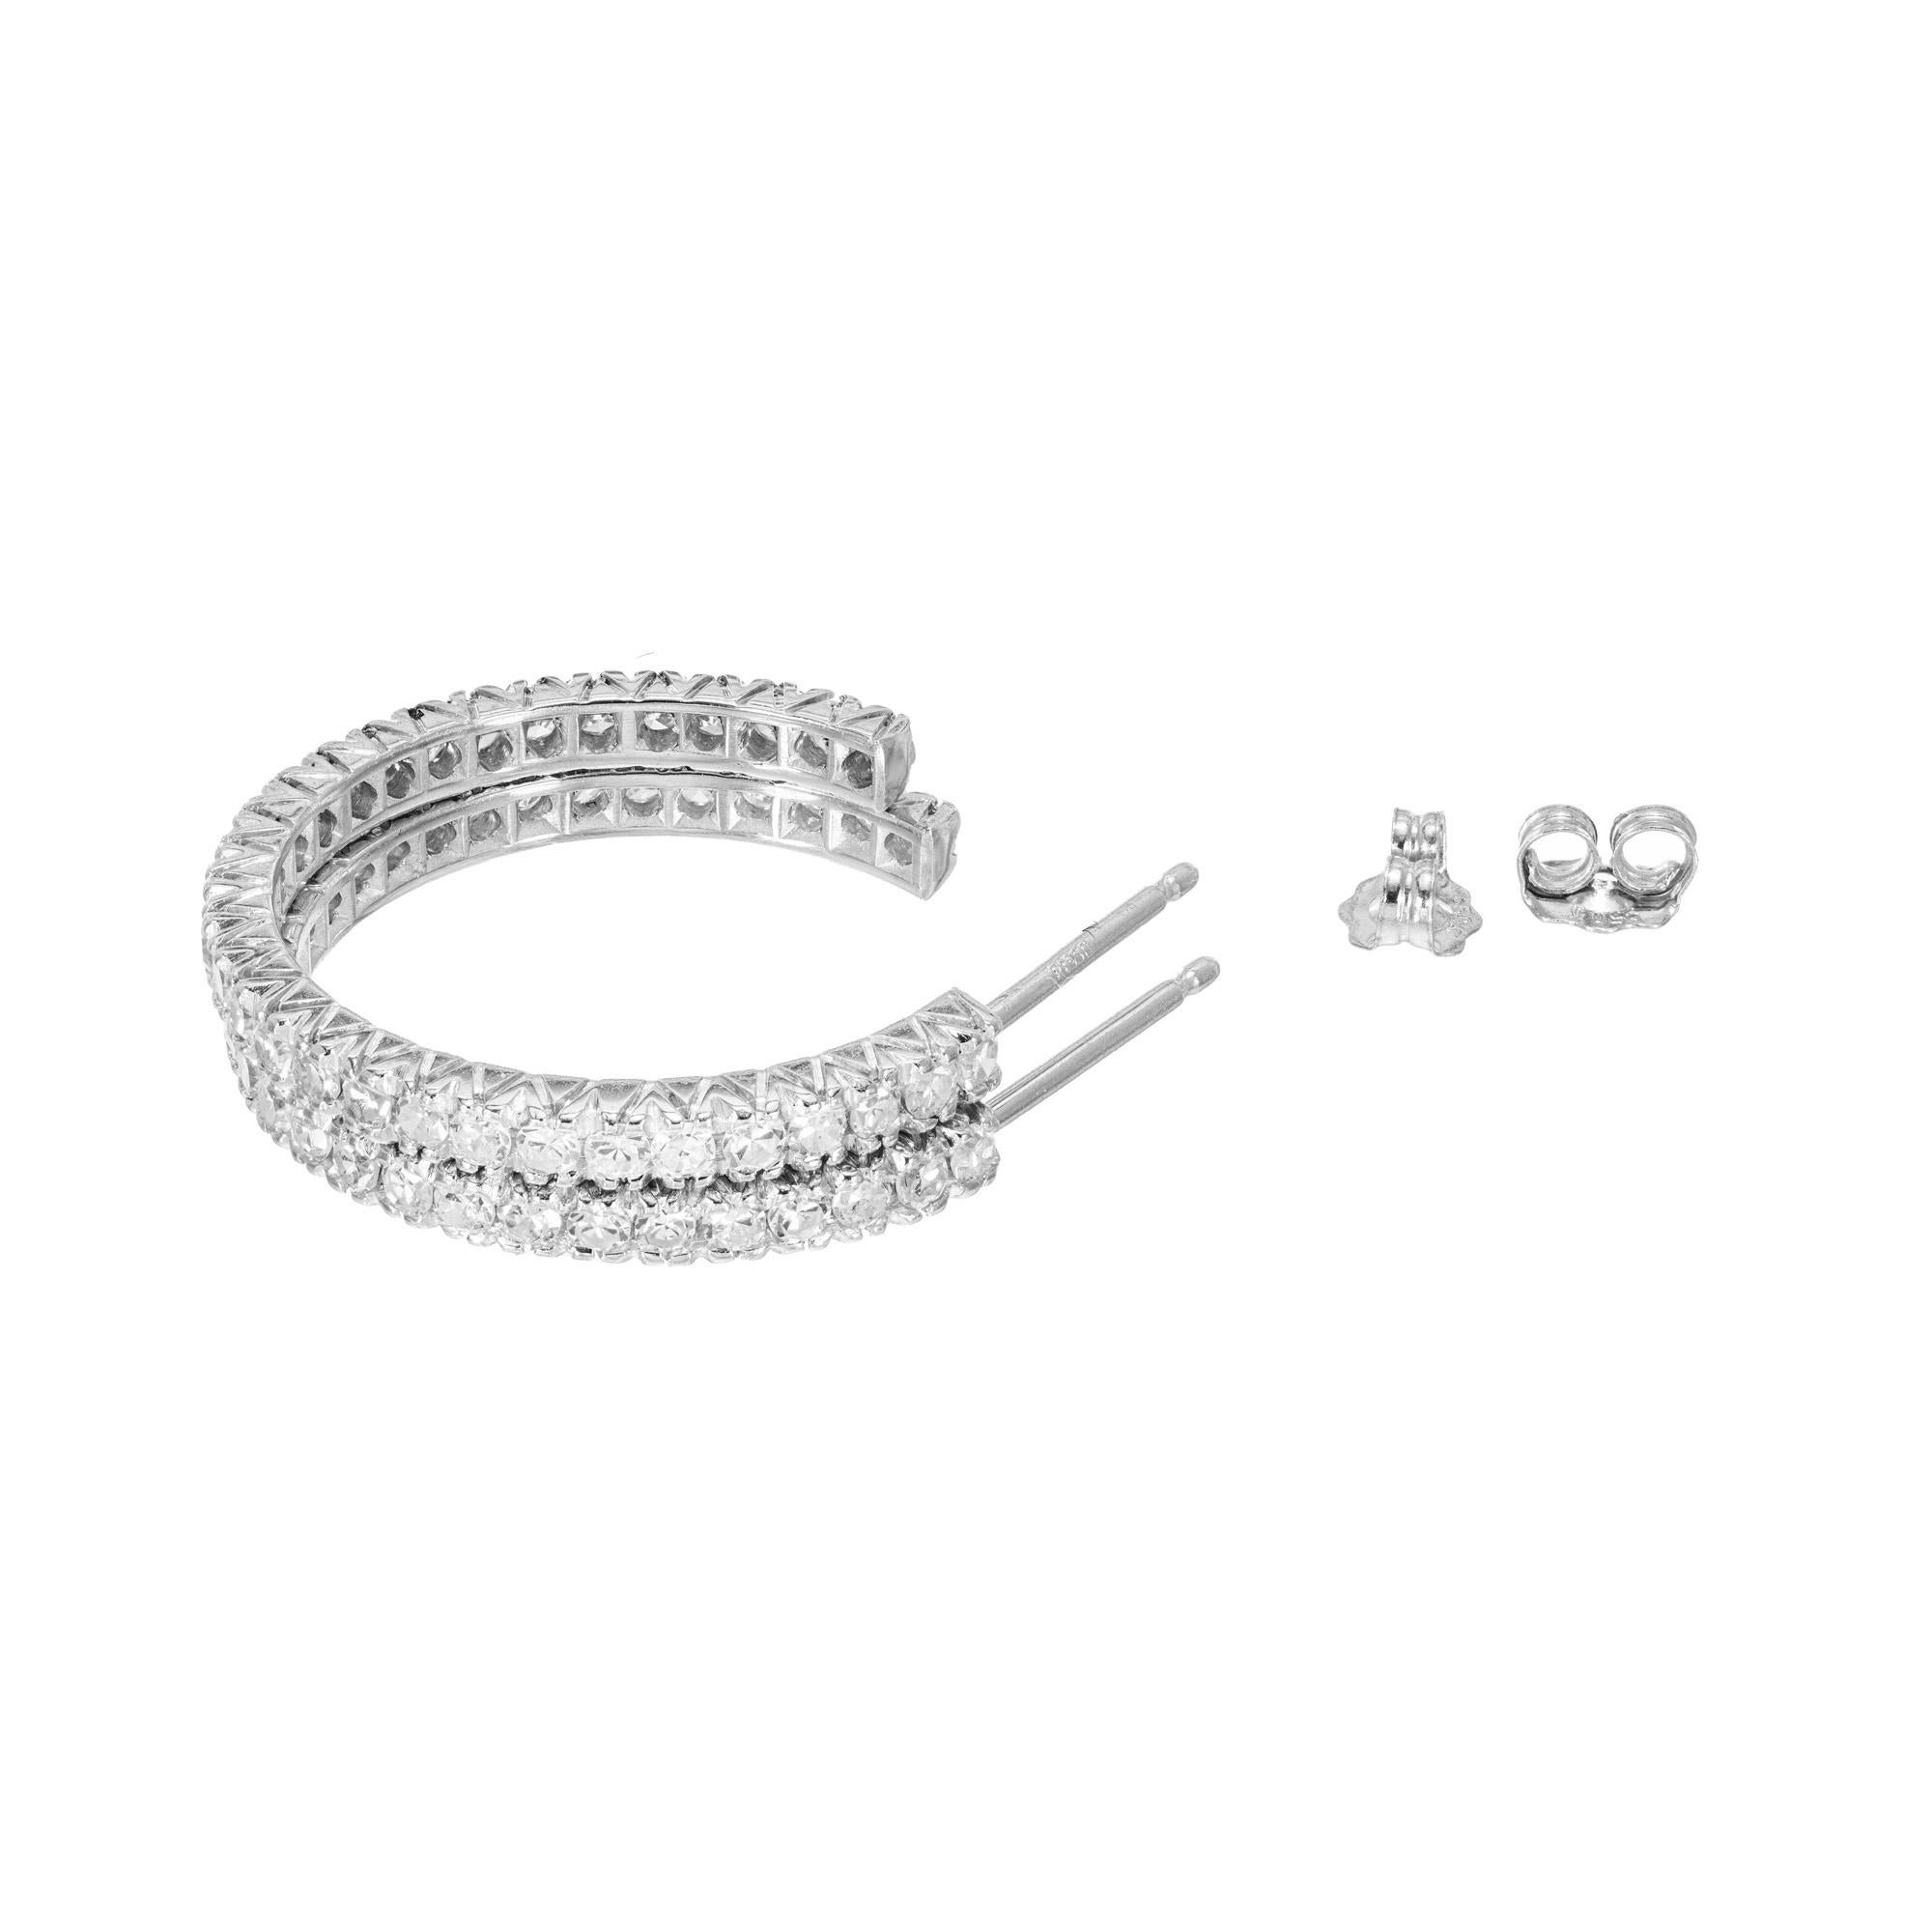 1.50 Carat Diamond Platinum Hoop Earrings  In Good Condition For Sale In Stamford, CT